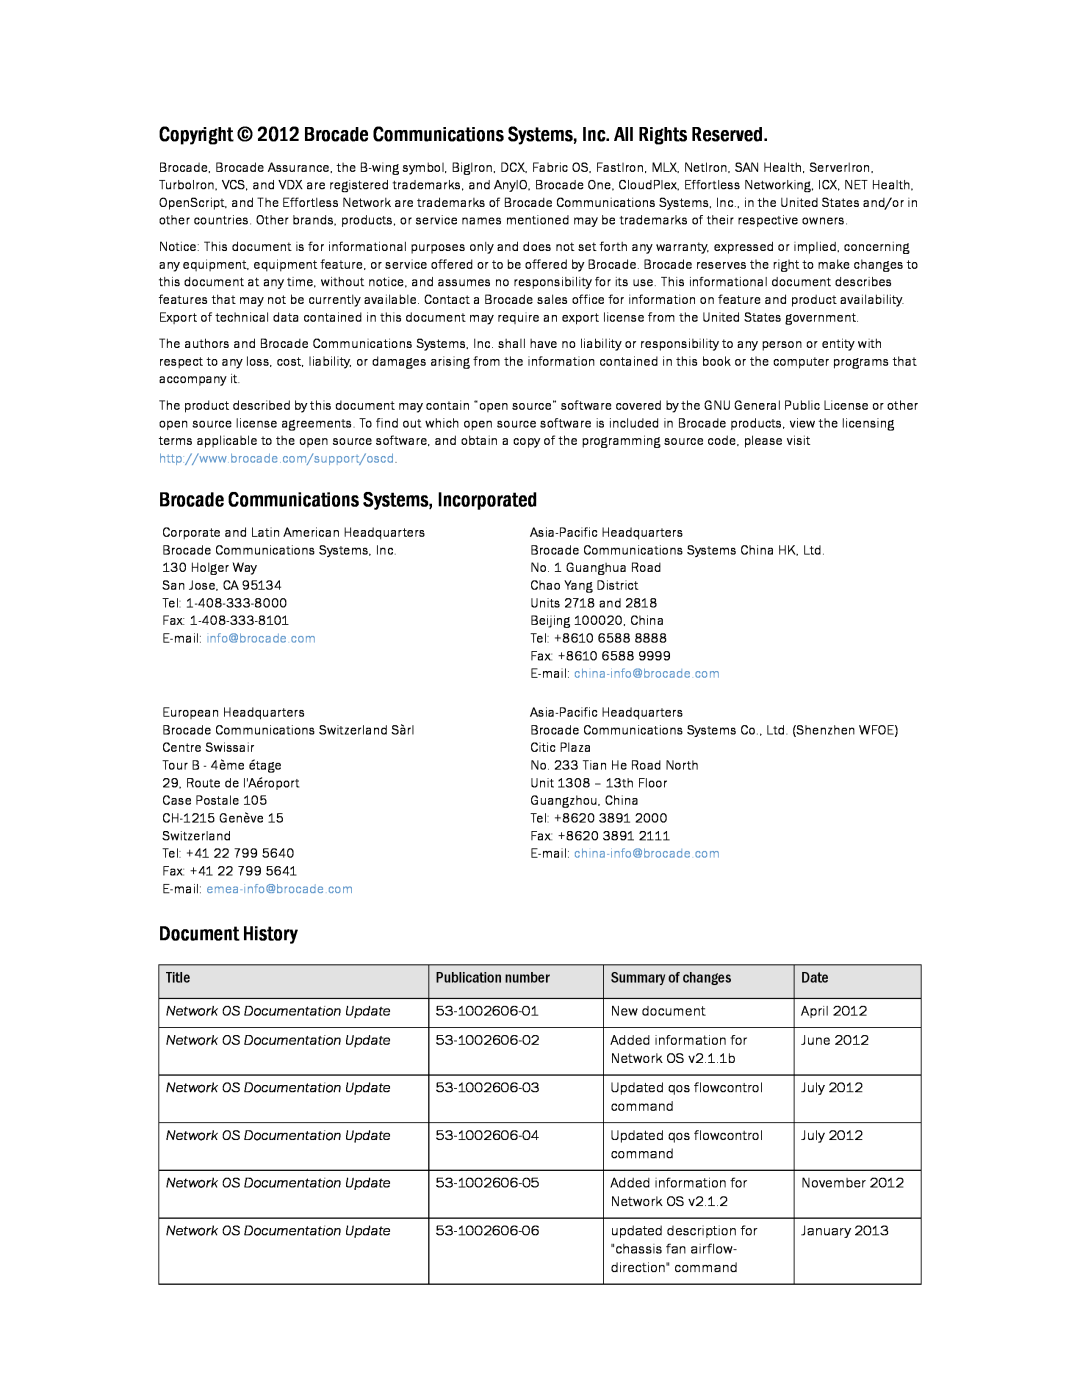 Brocade Communications Systems 2.1 manual Brocade Communications Systems, Incorporated, Document History, Title, Date 